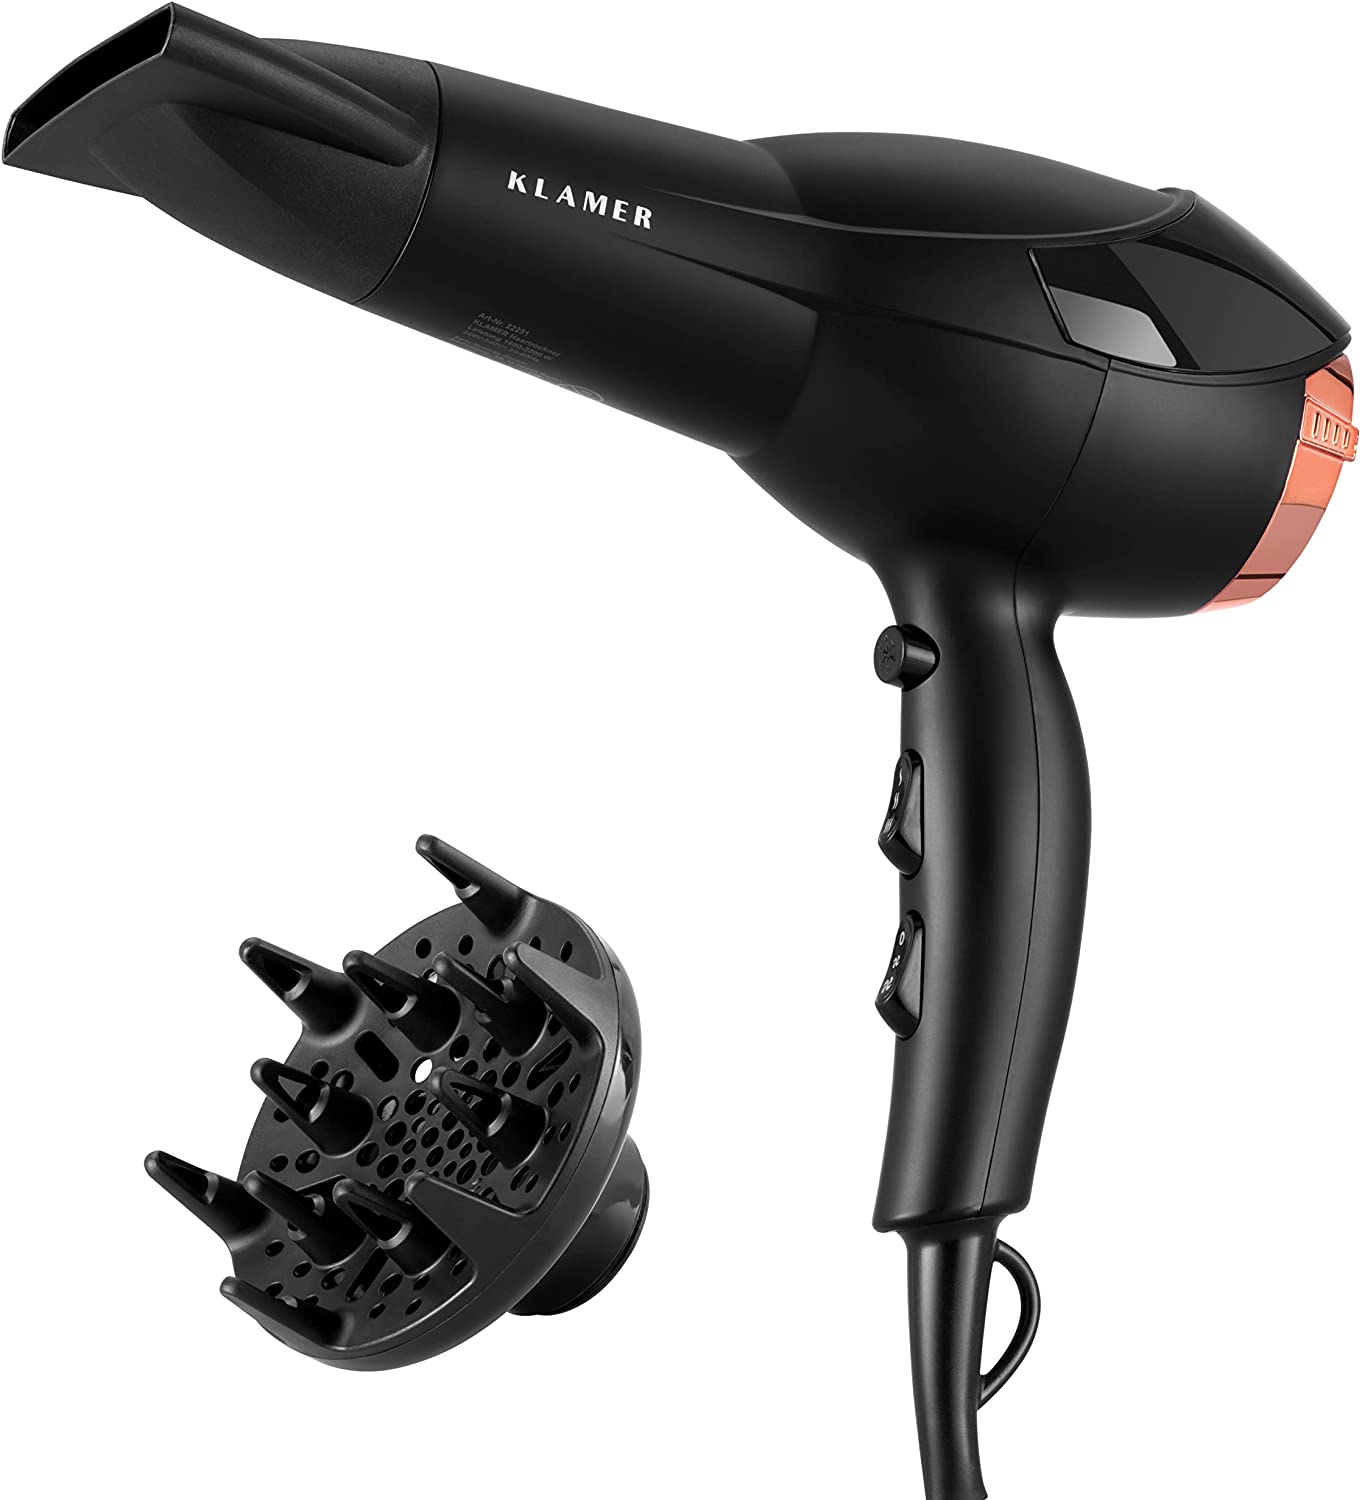 Klamer Hair Dry 2200 W, Ion Hair Dryer, Universal Anti Frizz Hair Dryer, 3 Heating & 2 Fan Levels and Cold Air Button, including Diffuser & Styling Nozzle